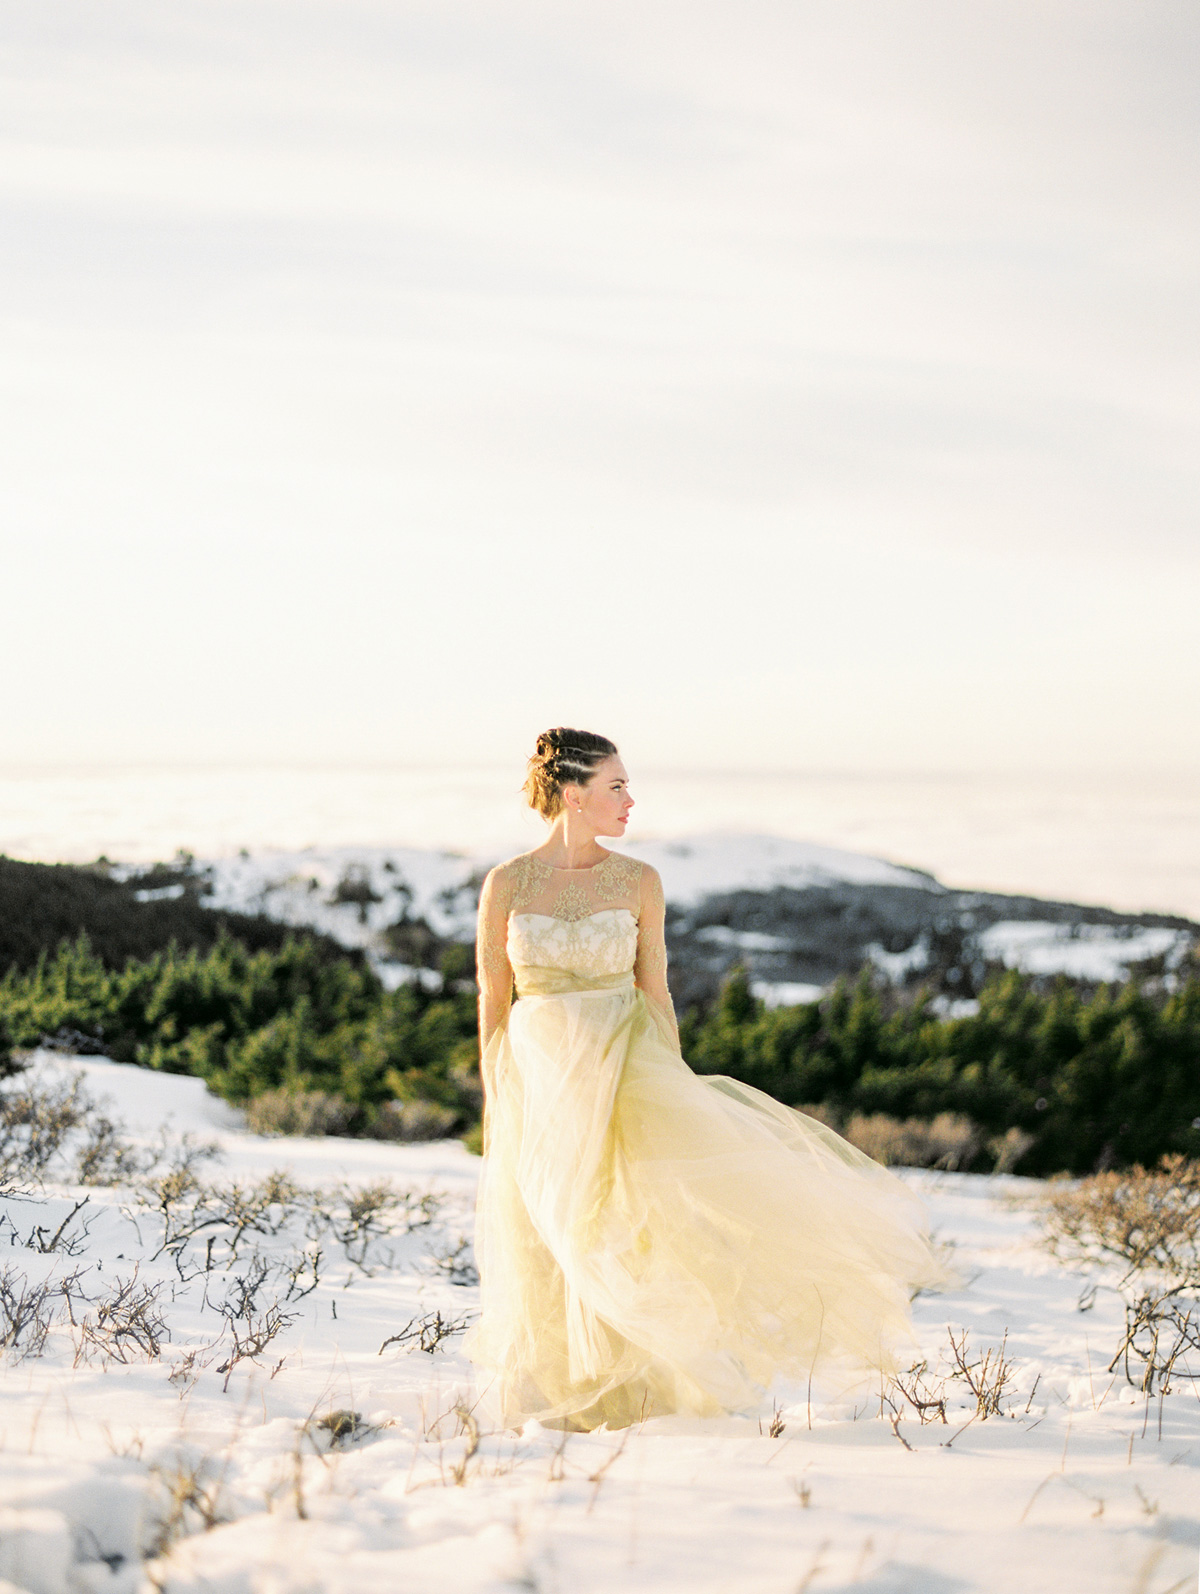 Alyssa London modeling for a bridal portrait session on Flattop Mountain. Alaska wedding photography based in Anchorage.